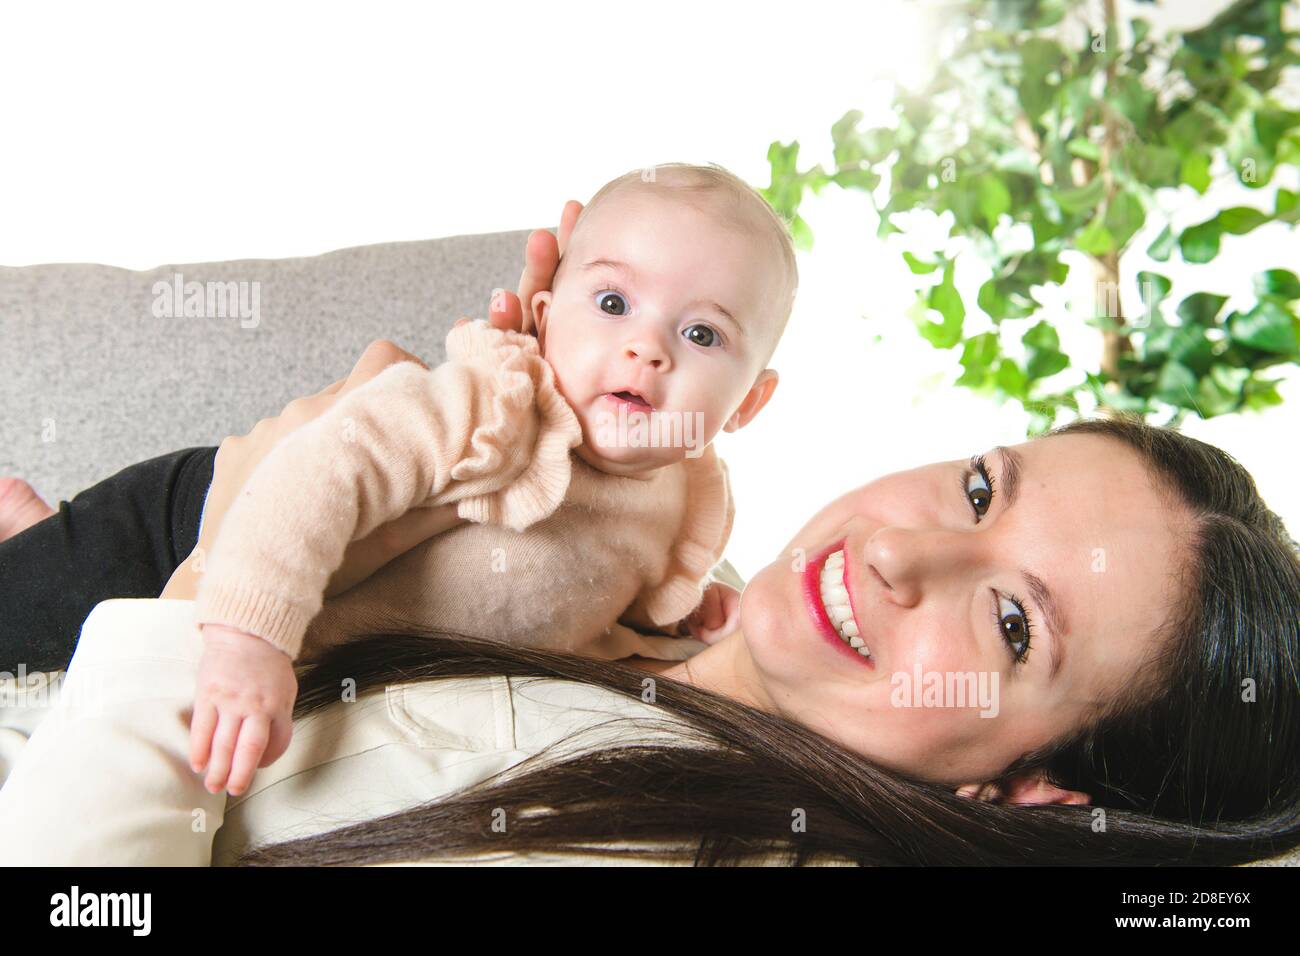 A nice Mother with baby girl on the sofa Stock Photo